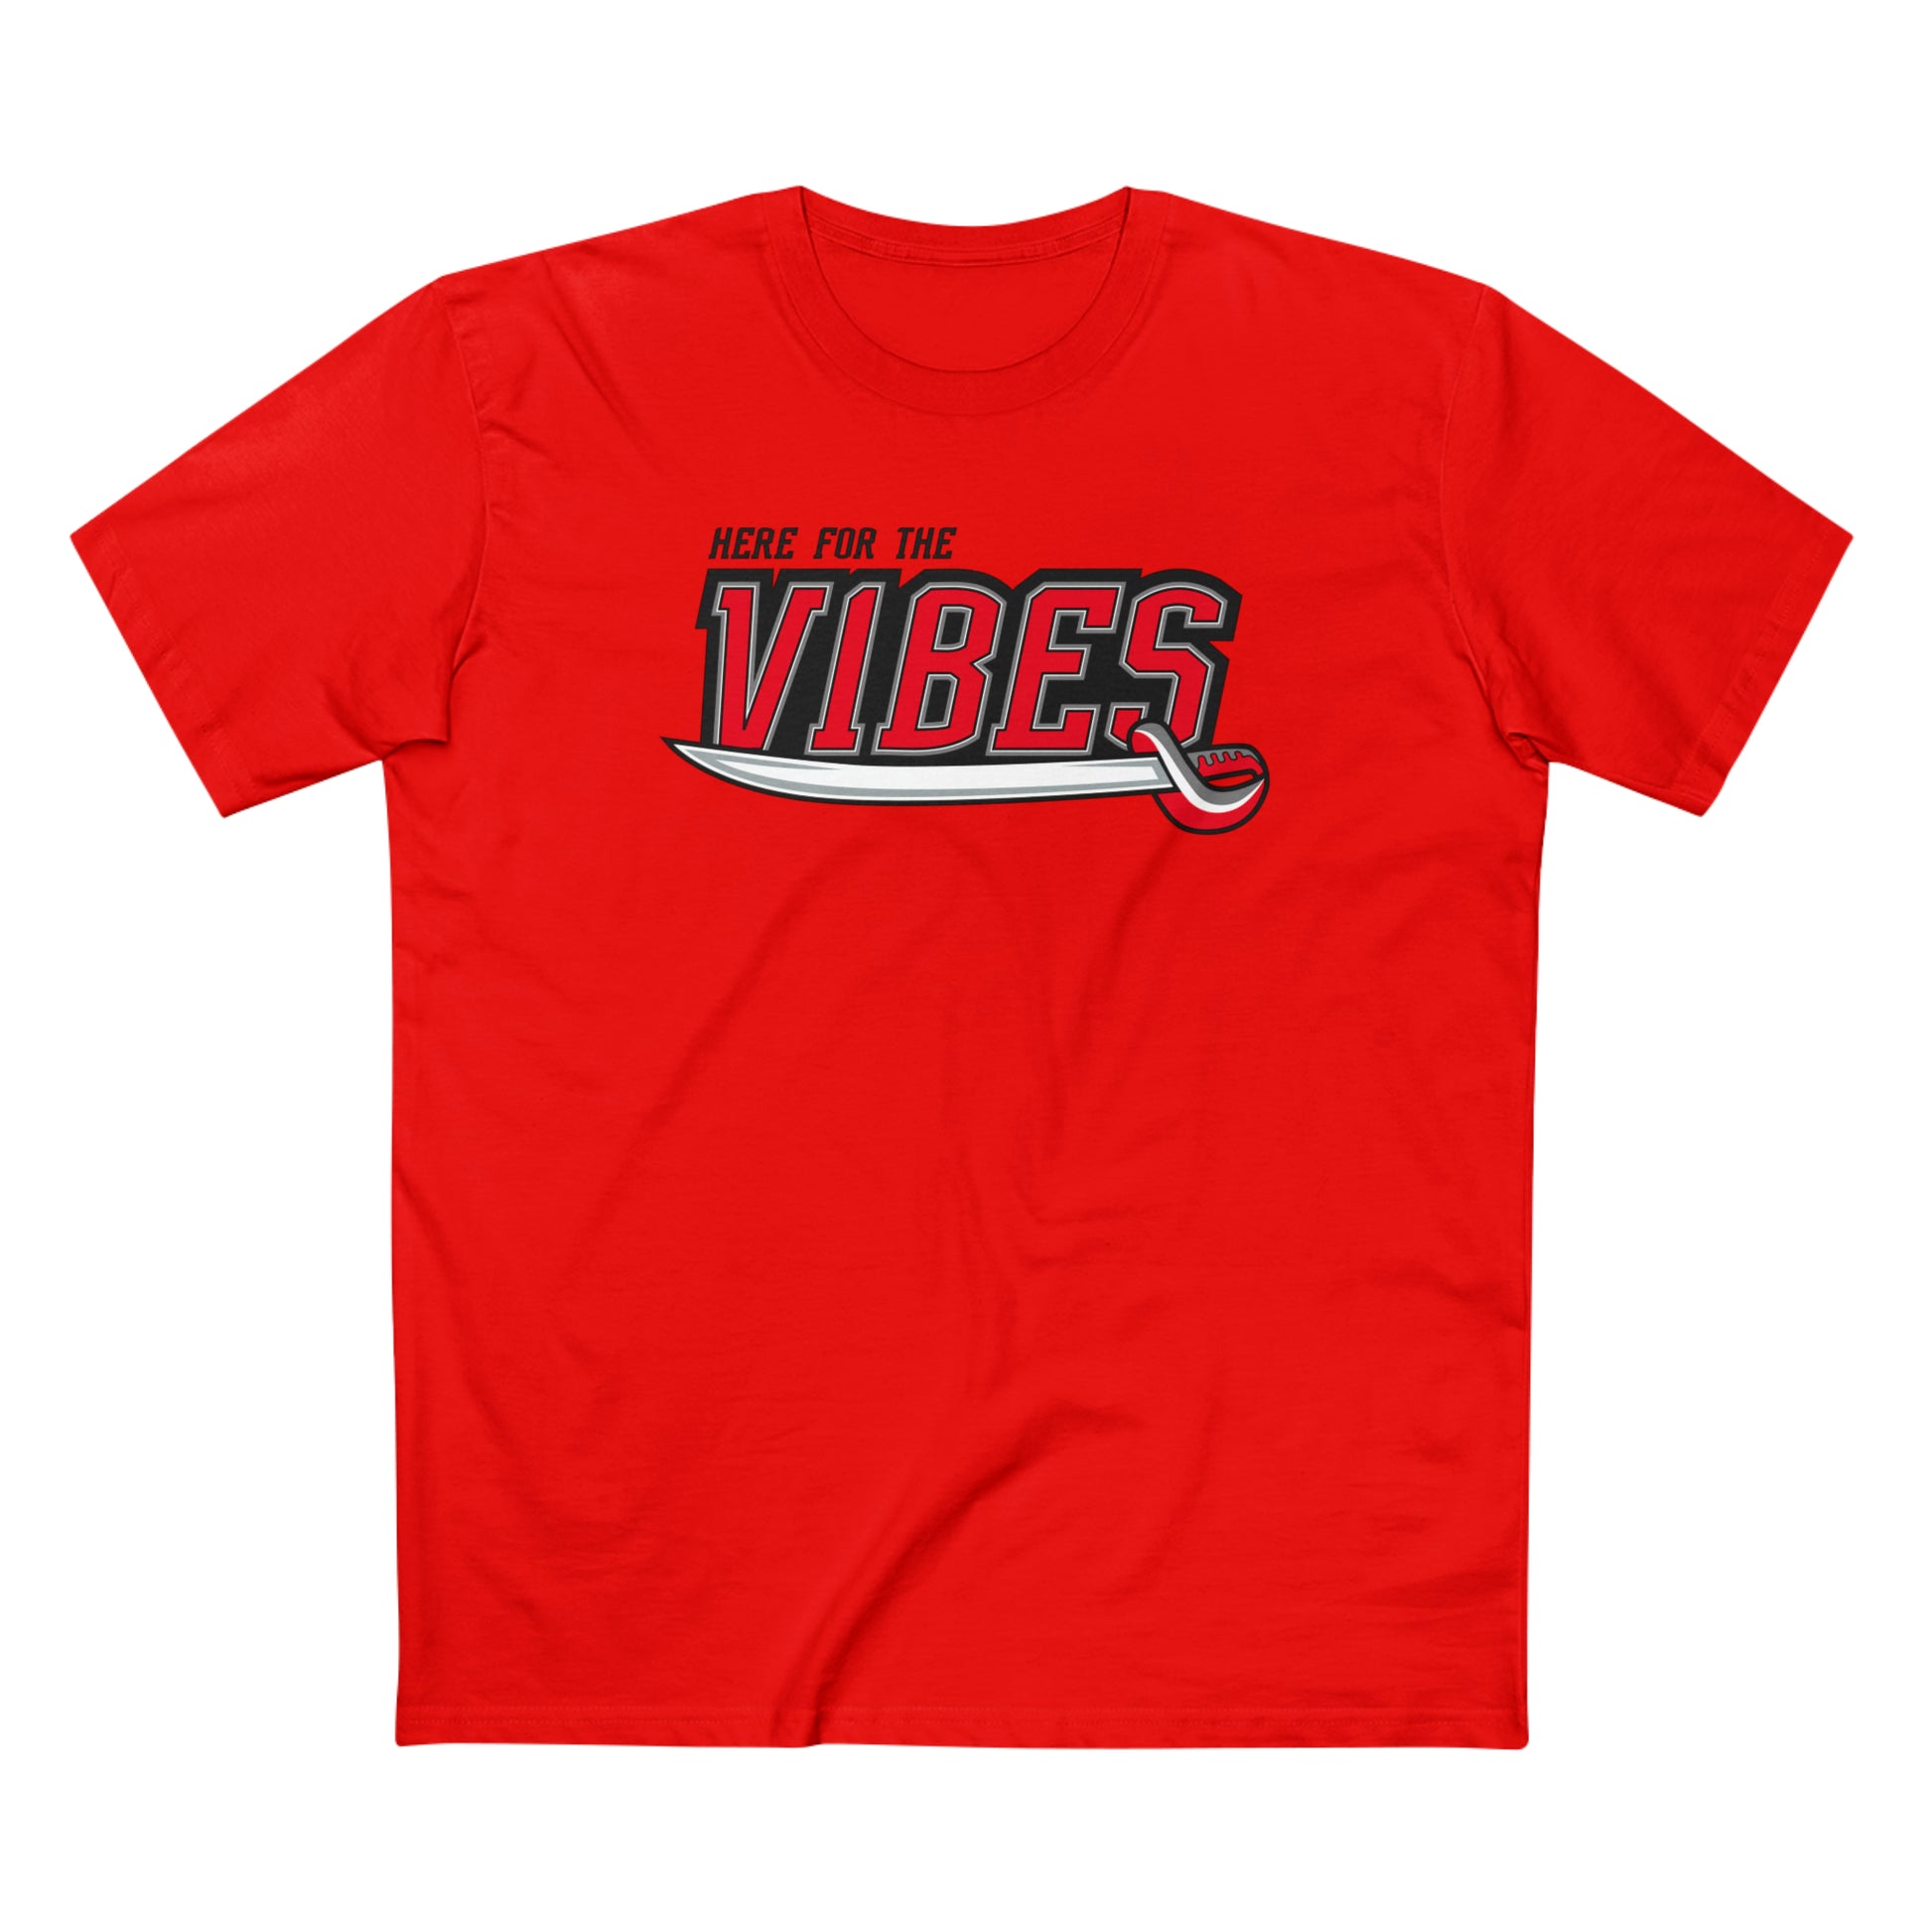 Briggs Milburn Design & Supply - Here For The Vibes - Red